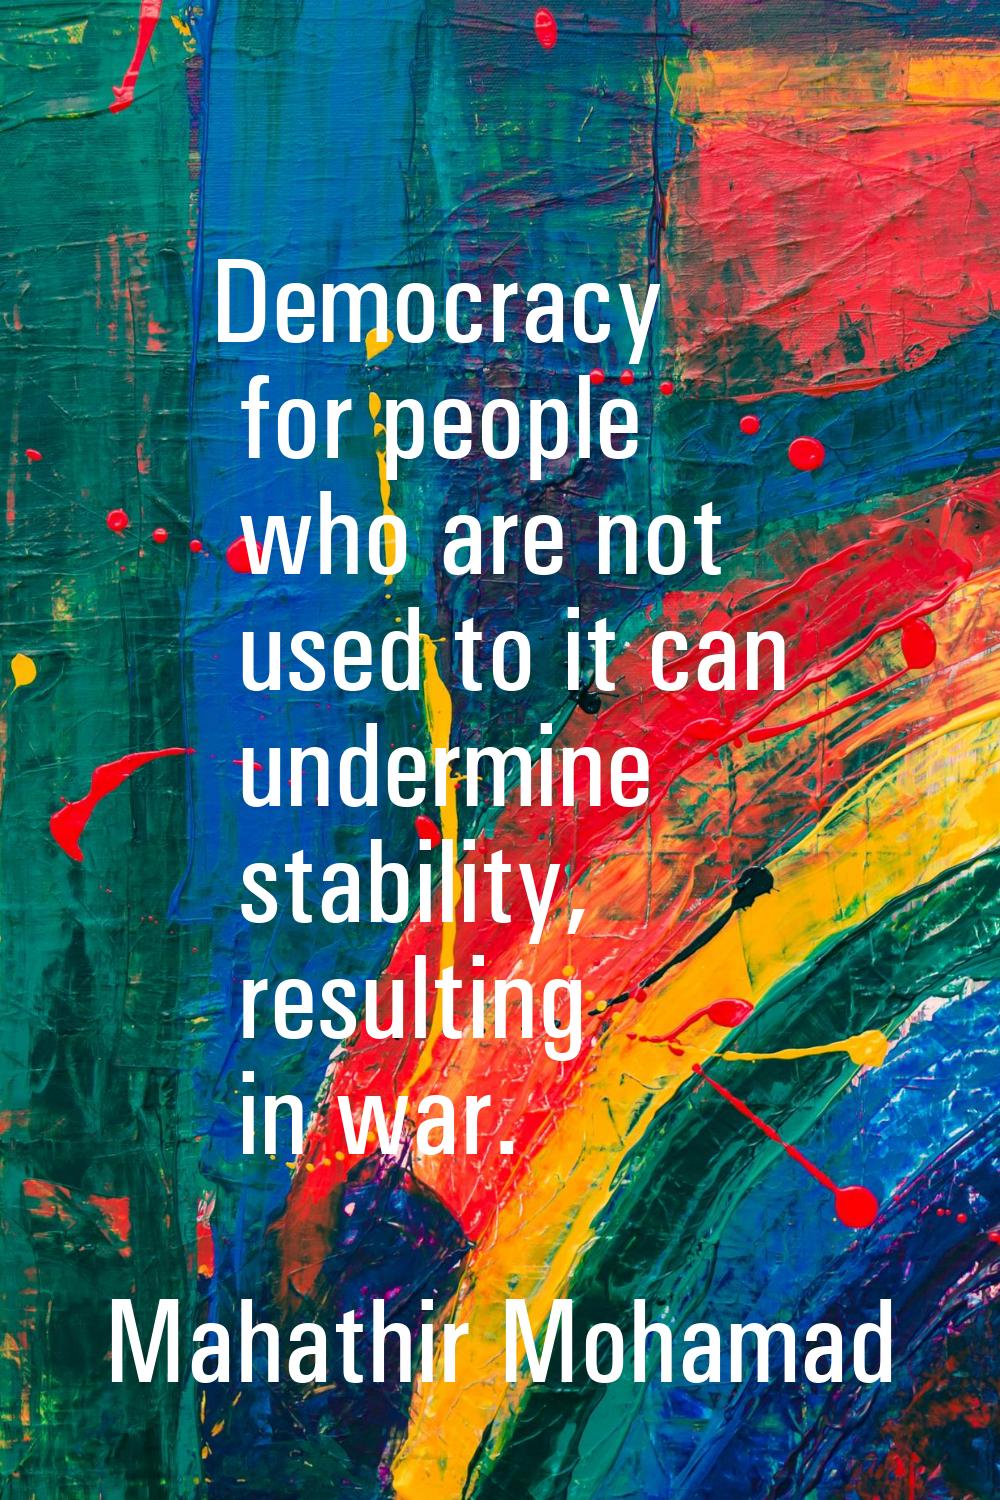 Democracy for people who are not used to it can undermine stability, resulting in war.